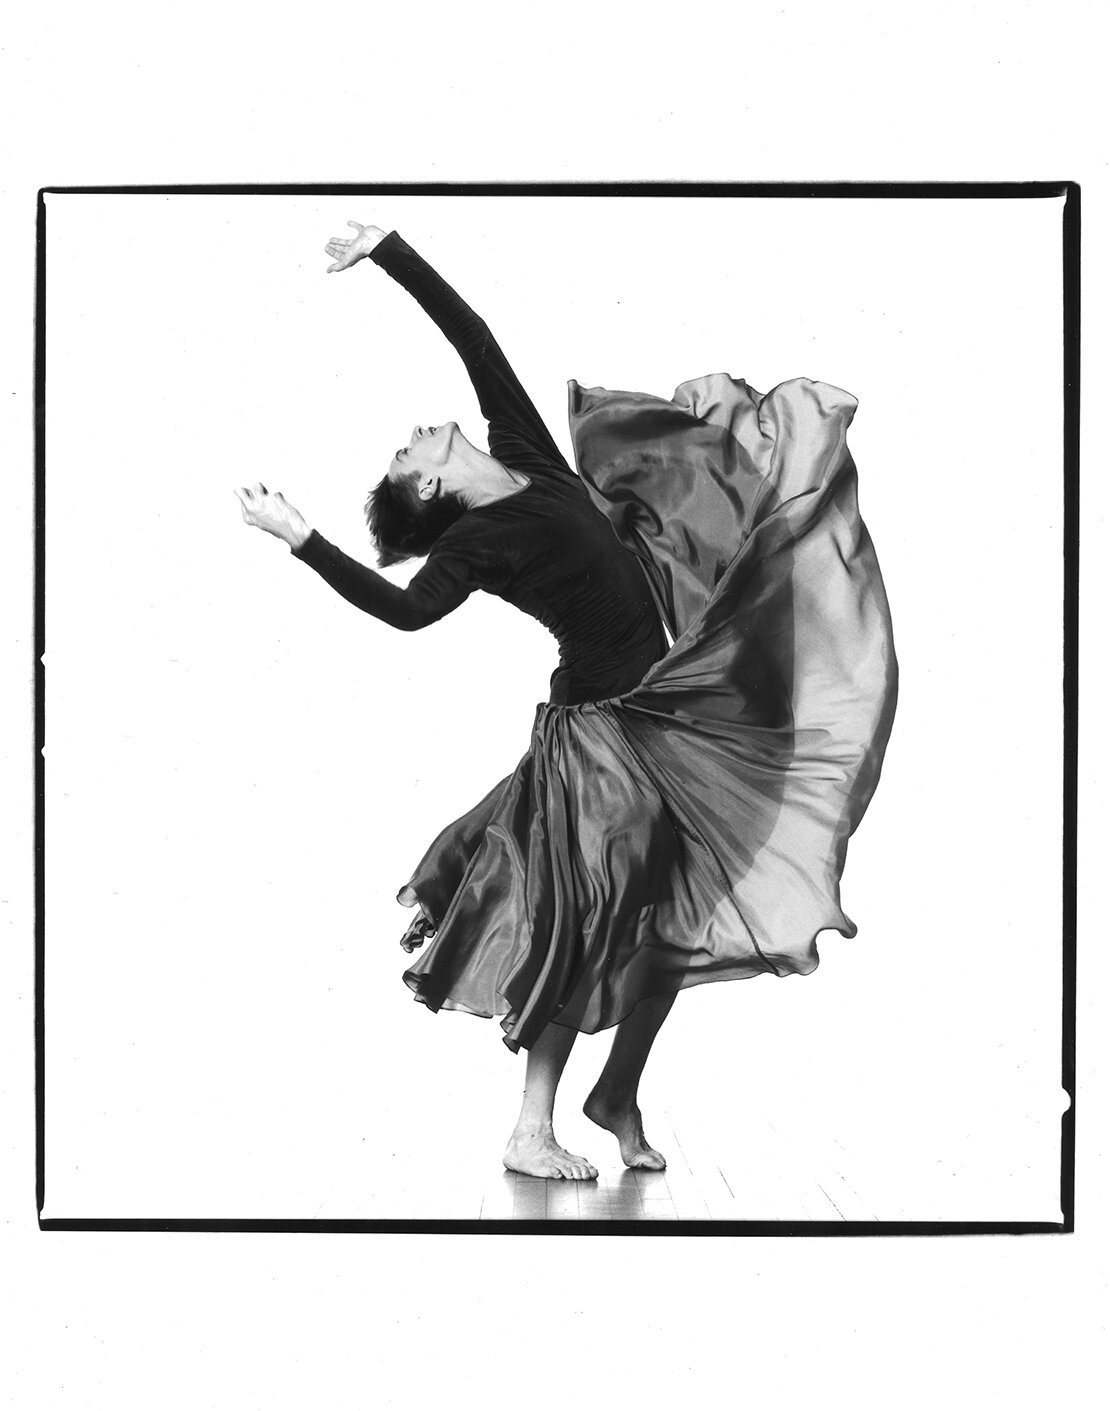 Photo of Peggy Baker by Lois Greenfield